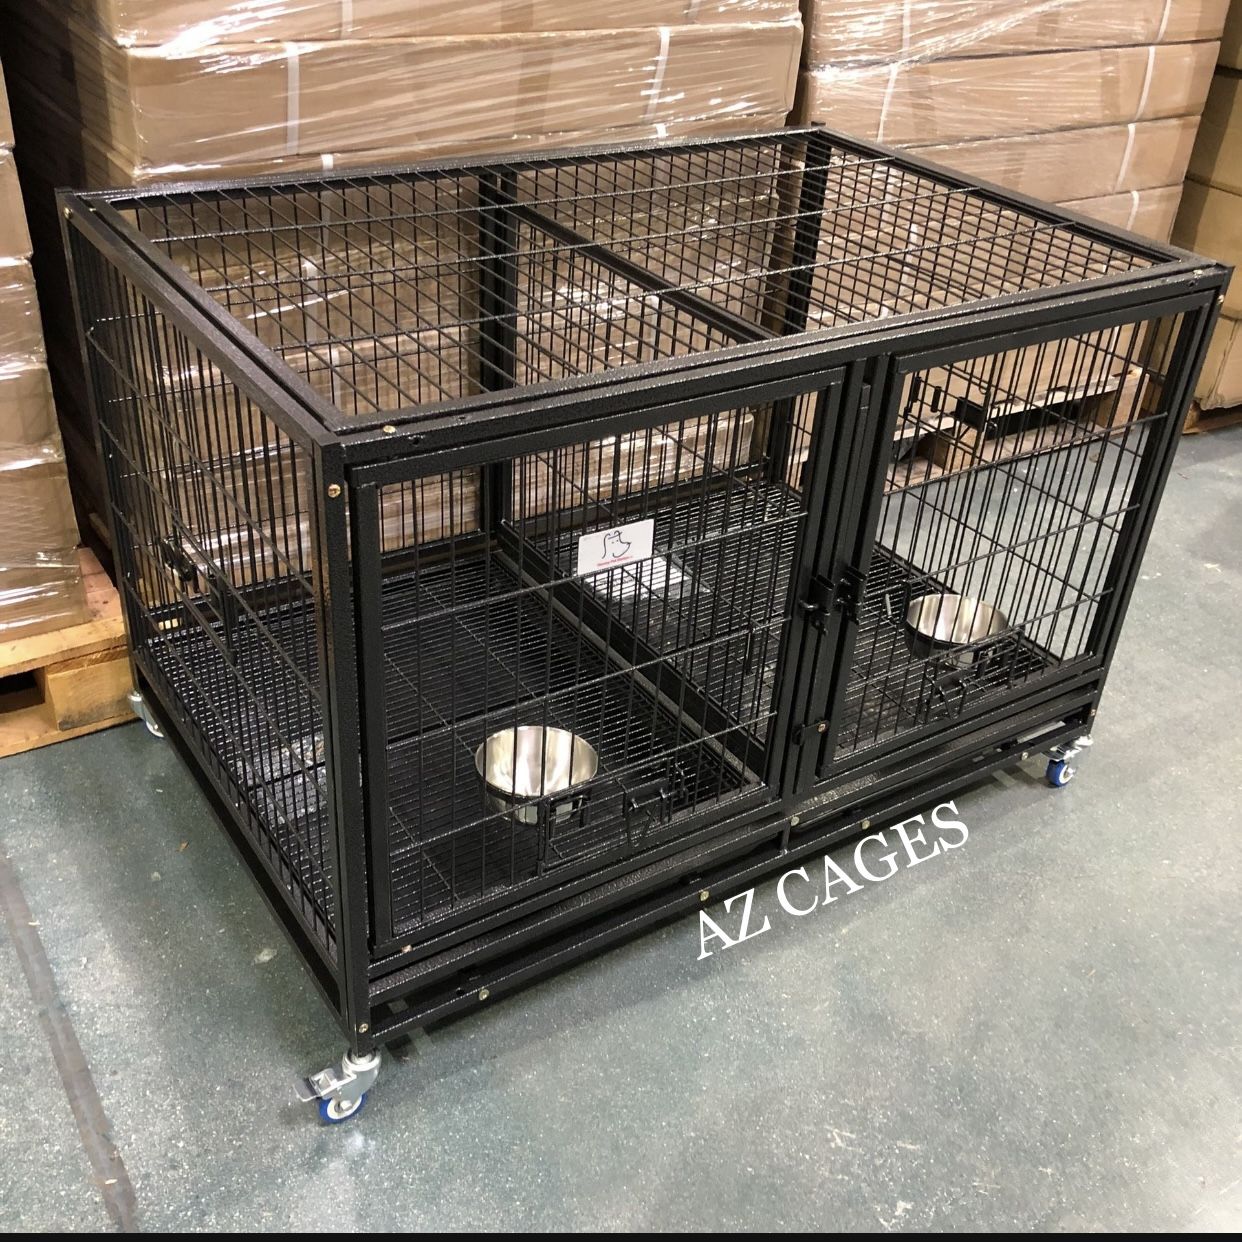 Brandnew HD Divider Kennel Crate Cage W/ Tray & Casters & Bowls  🐶🐶 Dimensions:43”L X 28”W X 26”H ✅